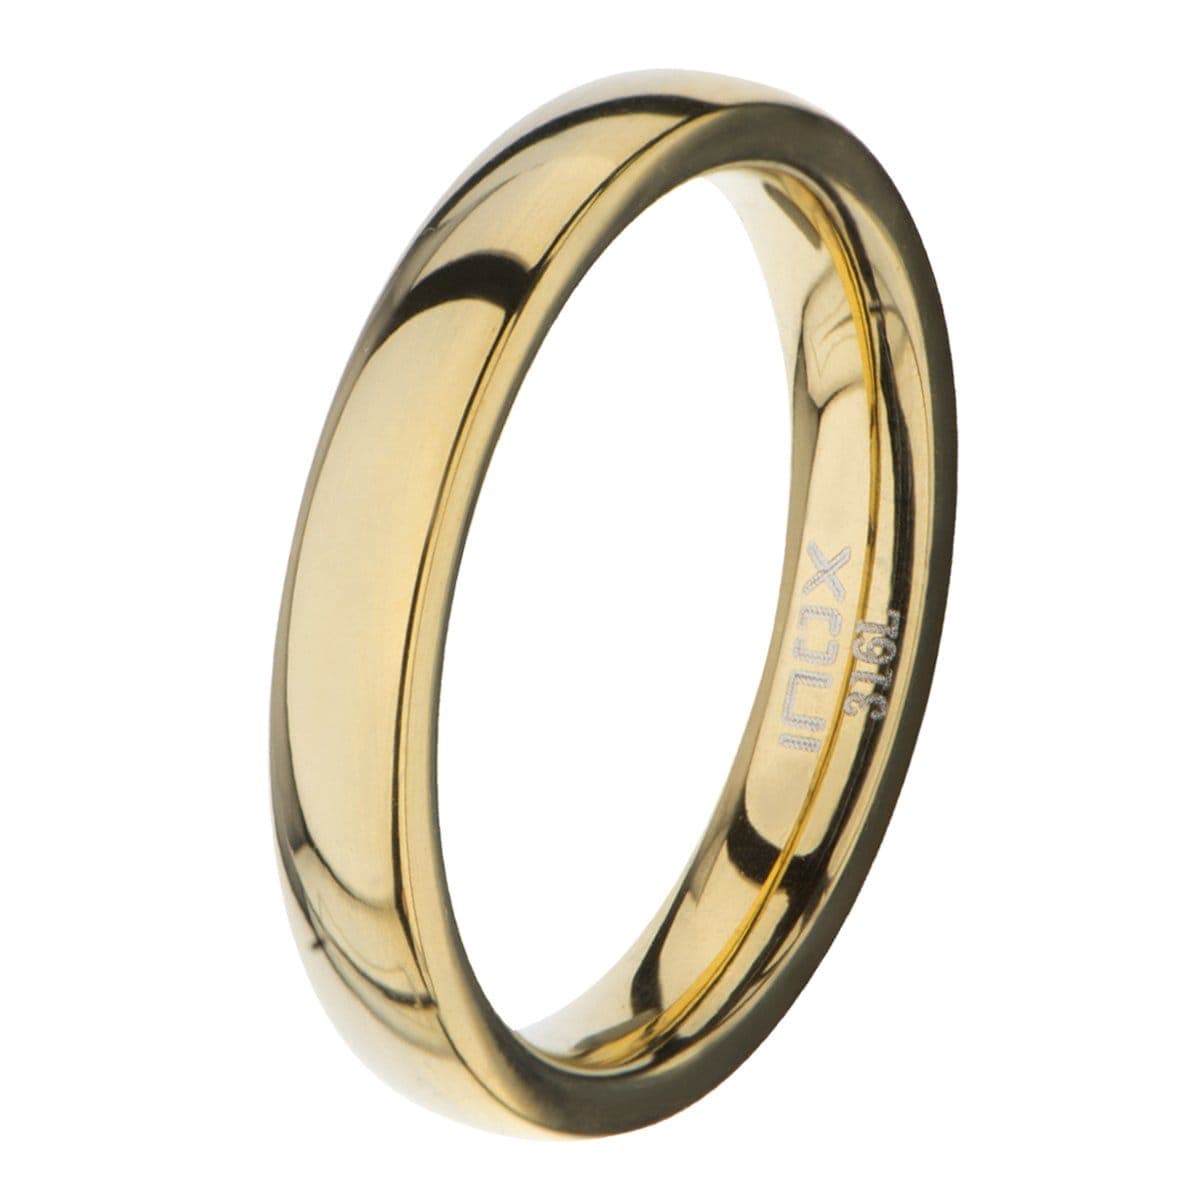 INOX JEWELRY Rings Golden Tone Stainless Steel Polished 3mm Band